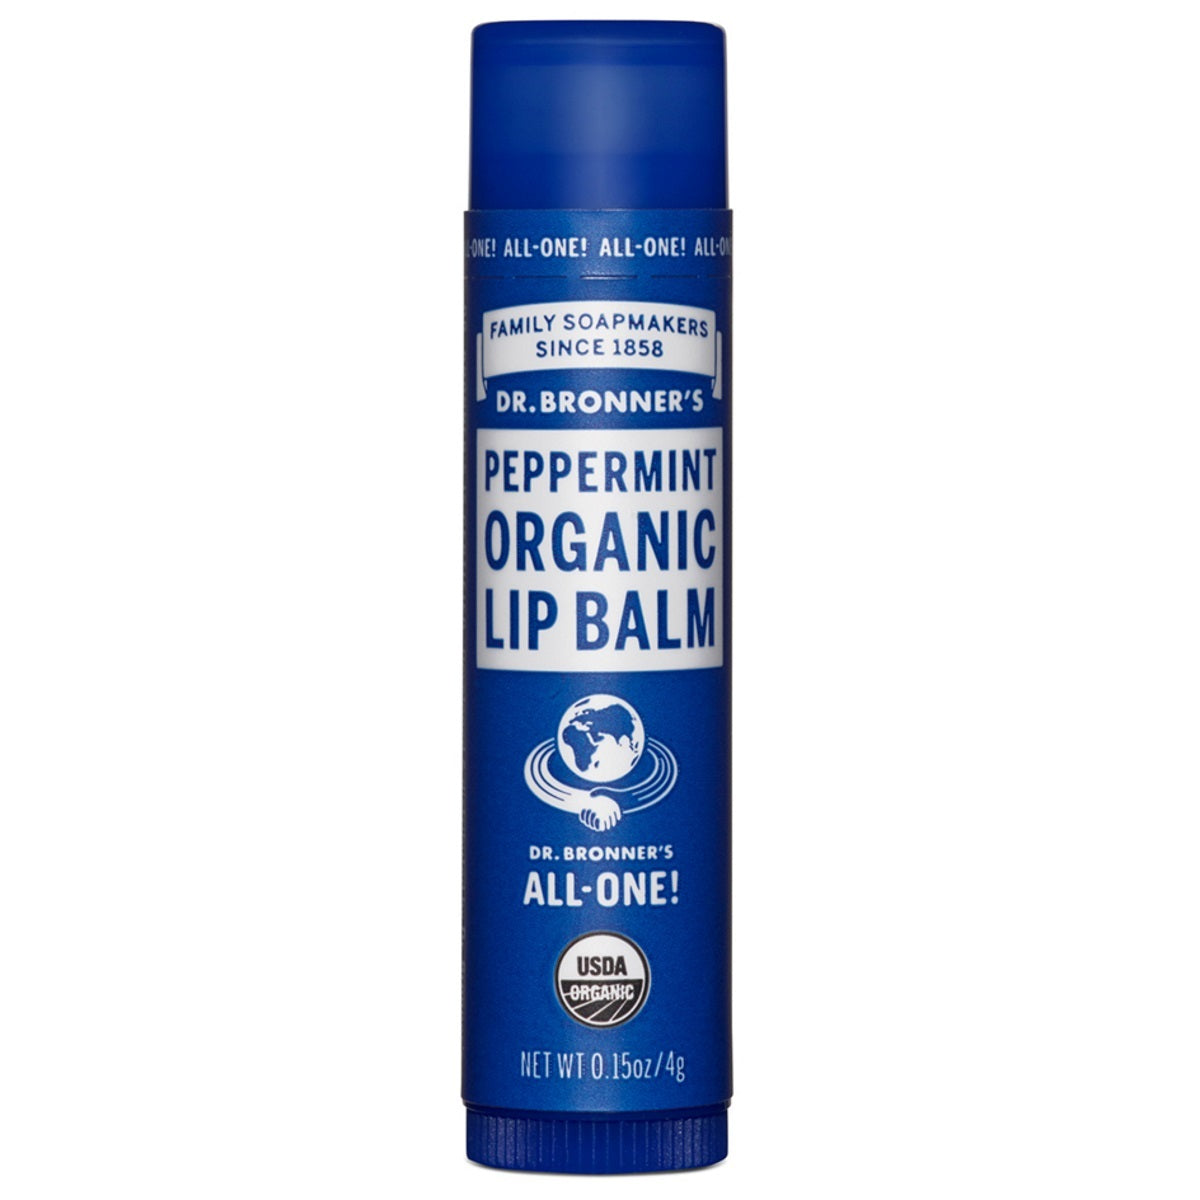 Primary image of Peppermint Lip Balm